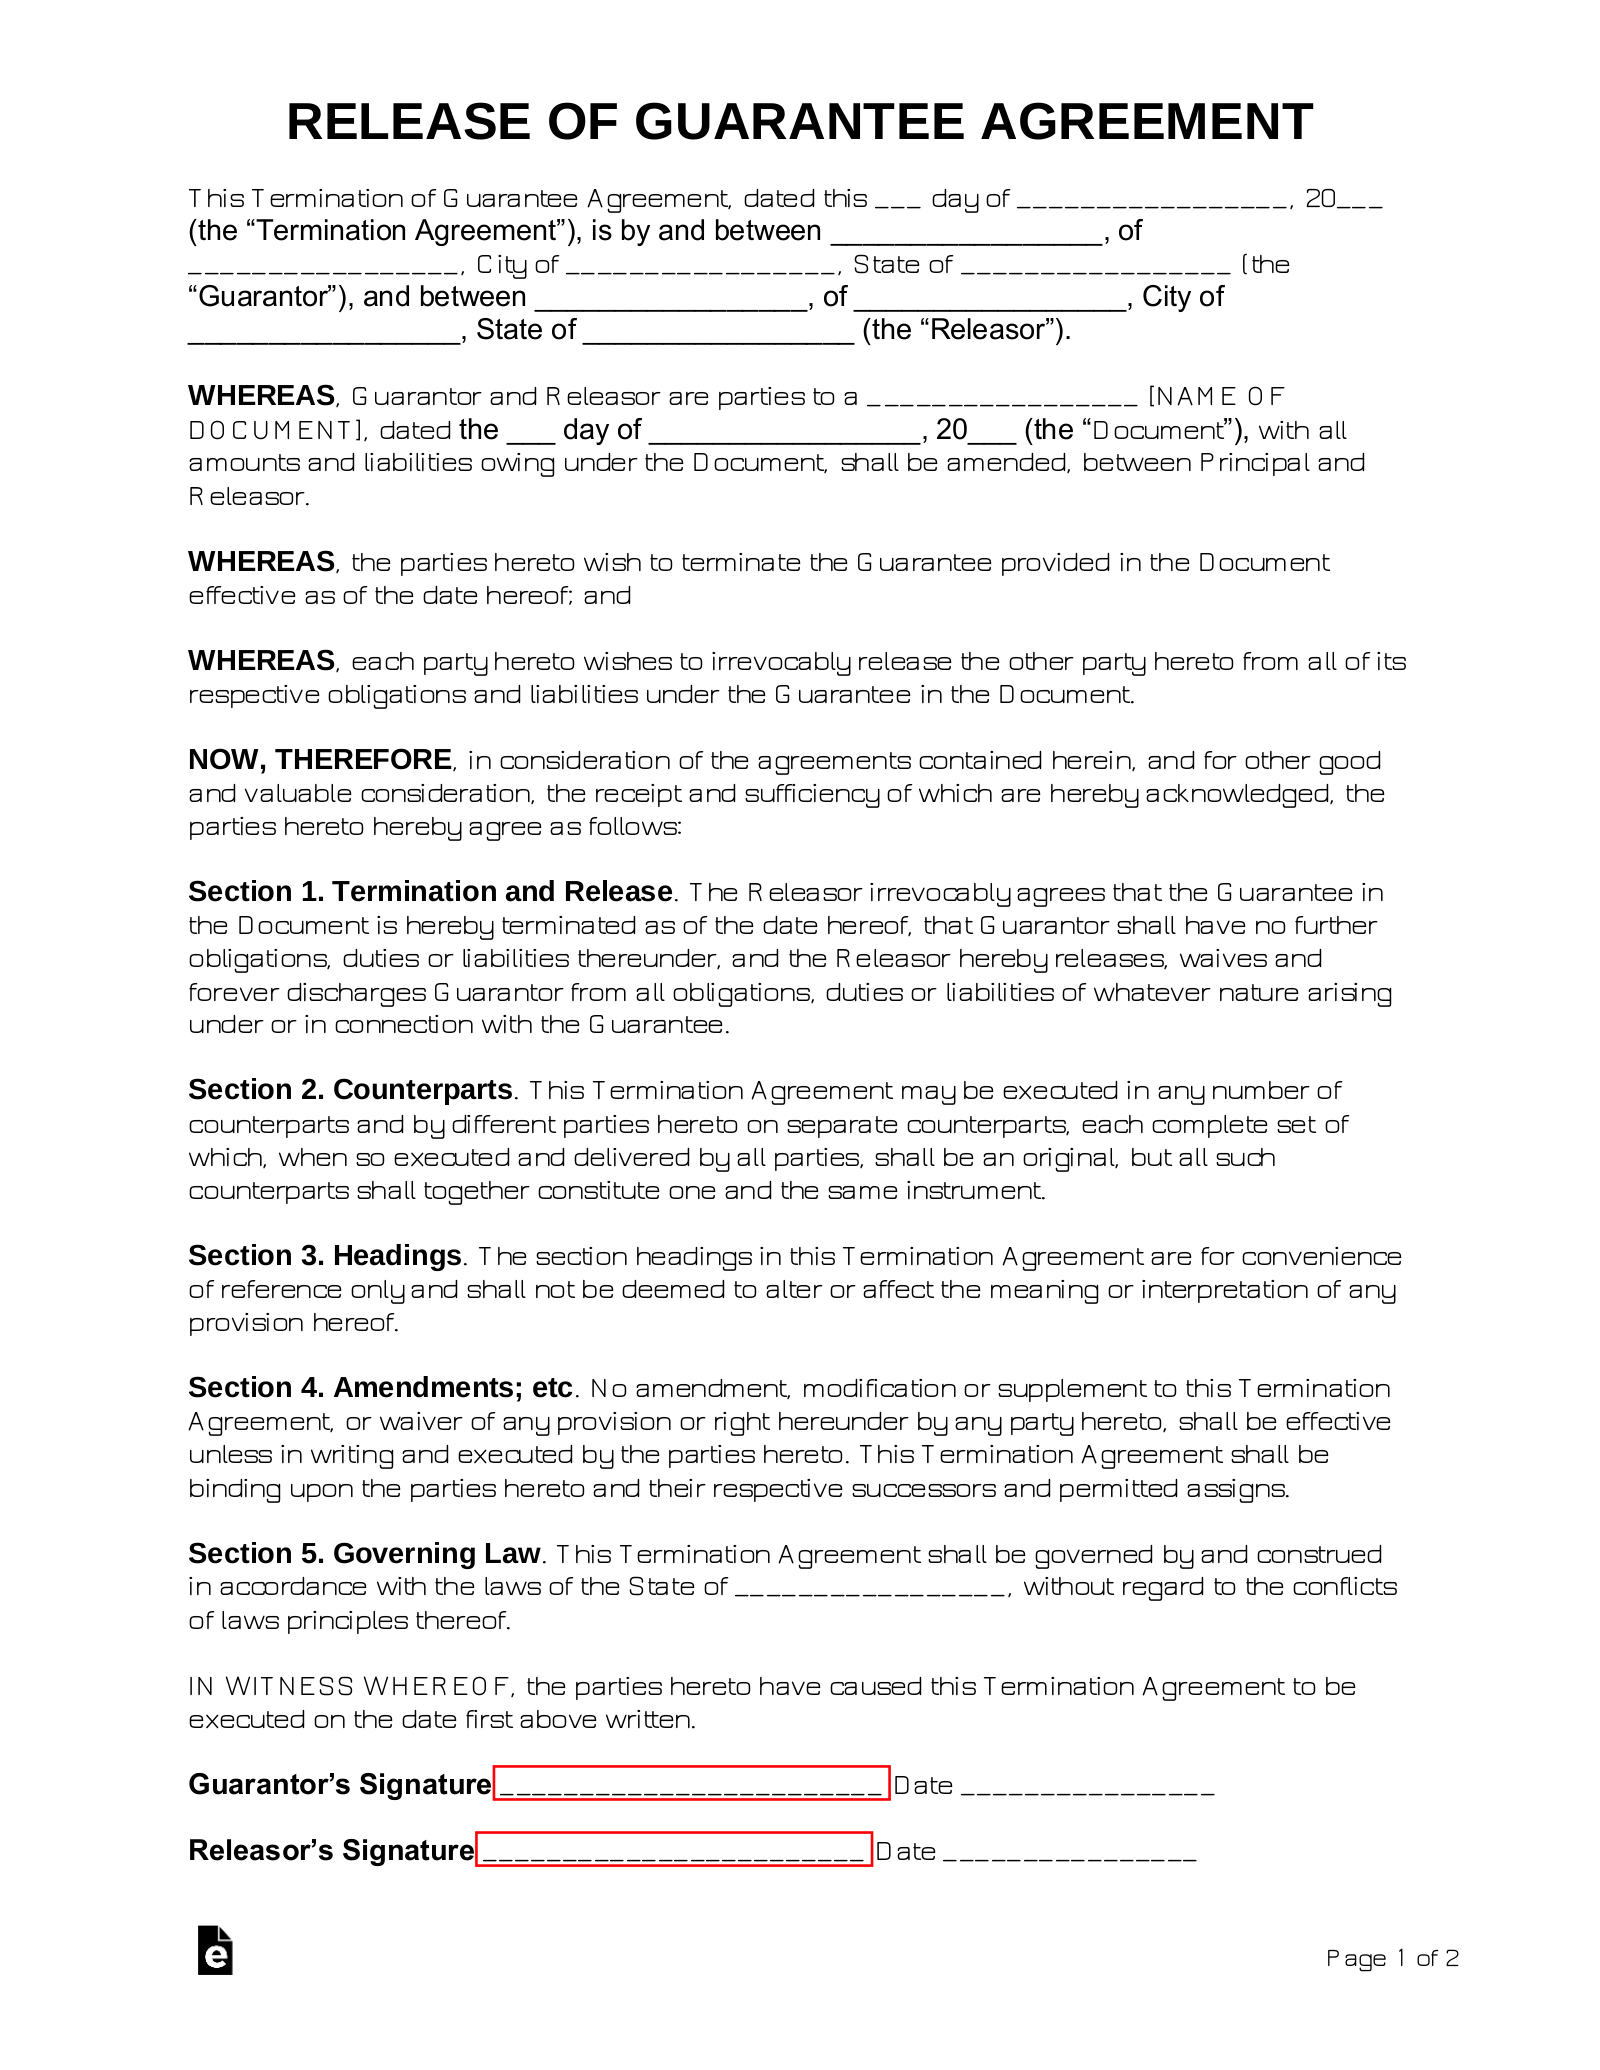 personal-guarantee-agreement-template